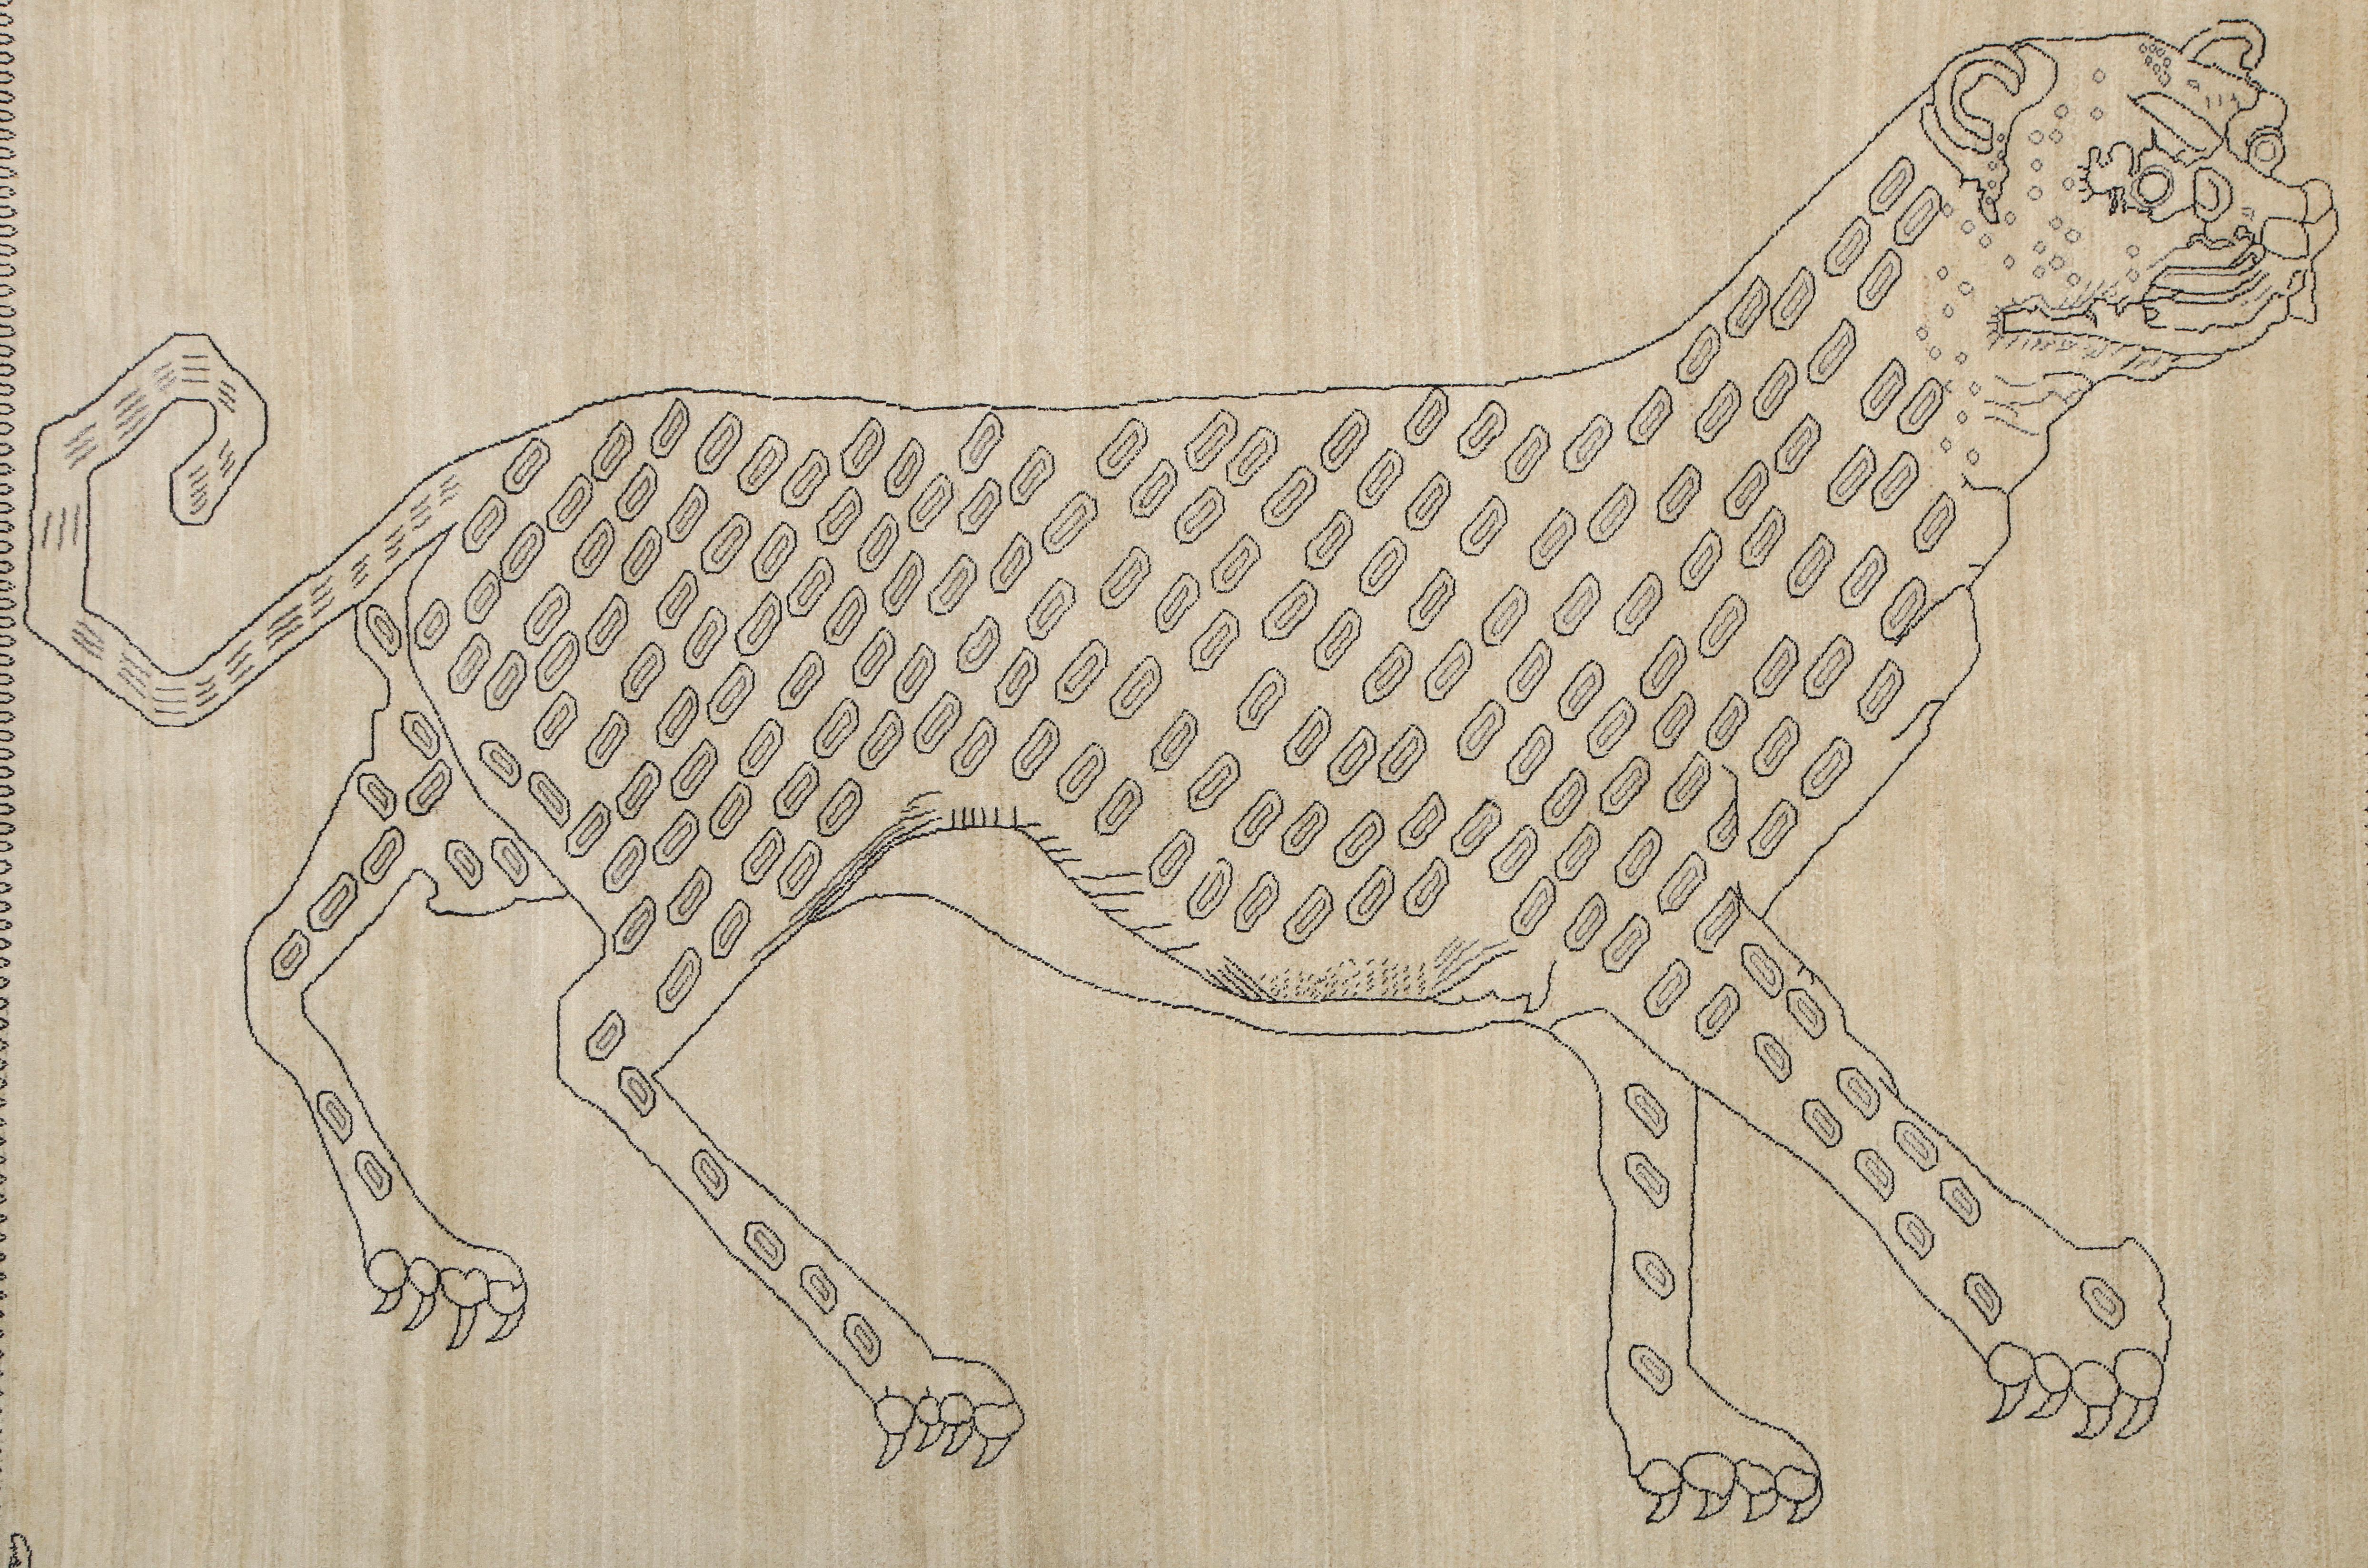 Hand knotted with pure wool and silk highlights, this 6' x 9' Persian leopard rug by Orley Shabahang will watch over your home for generations. The leopard's graceful form seems to prowl across the rug's expanse, its rich hues of cream and gray